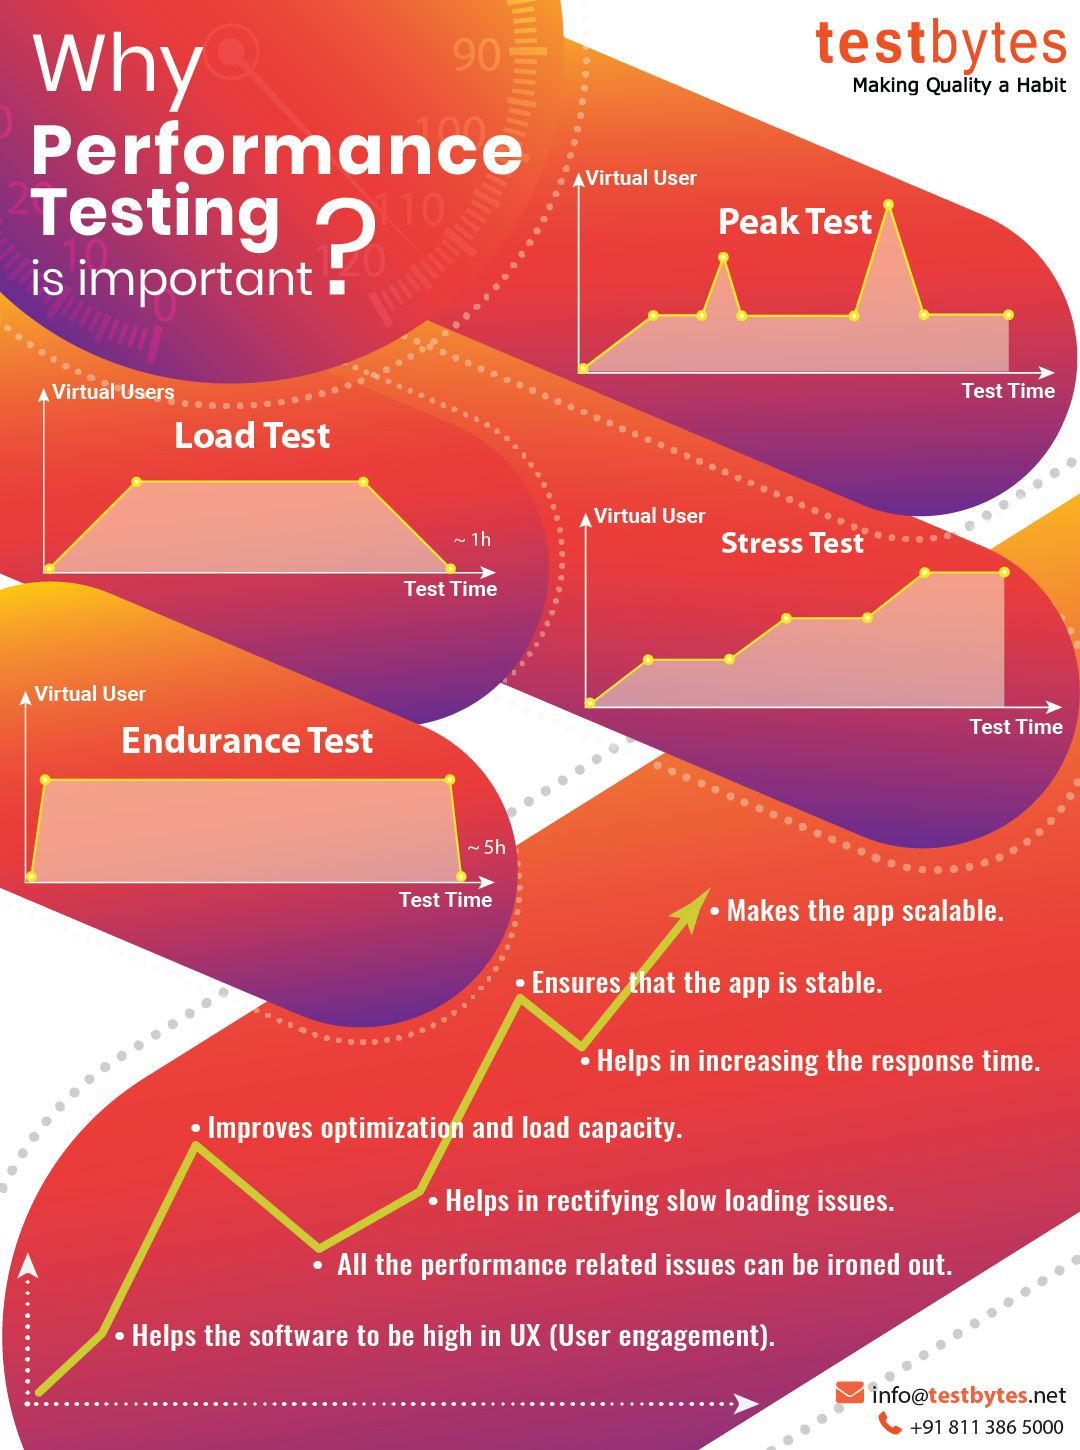 Why Performance Testing is Important?